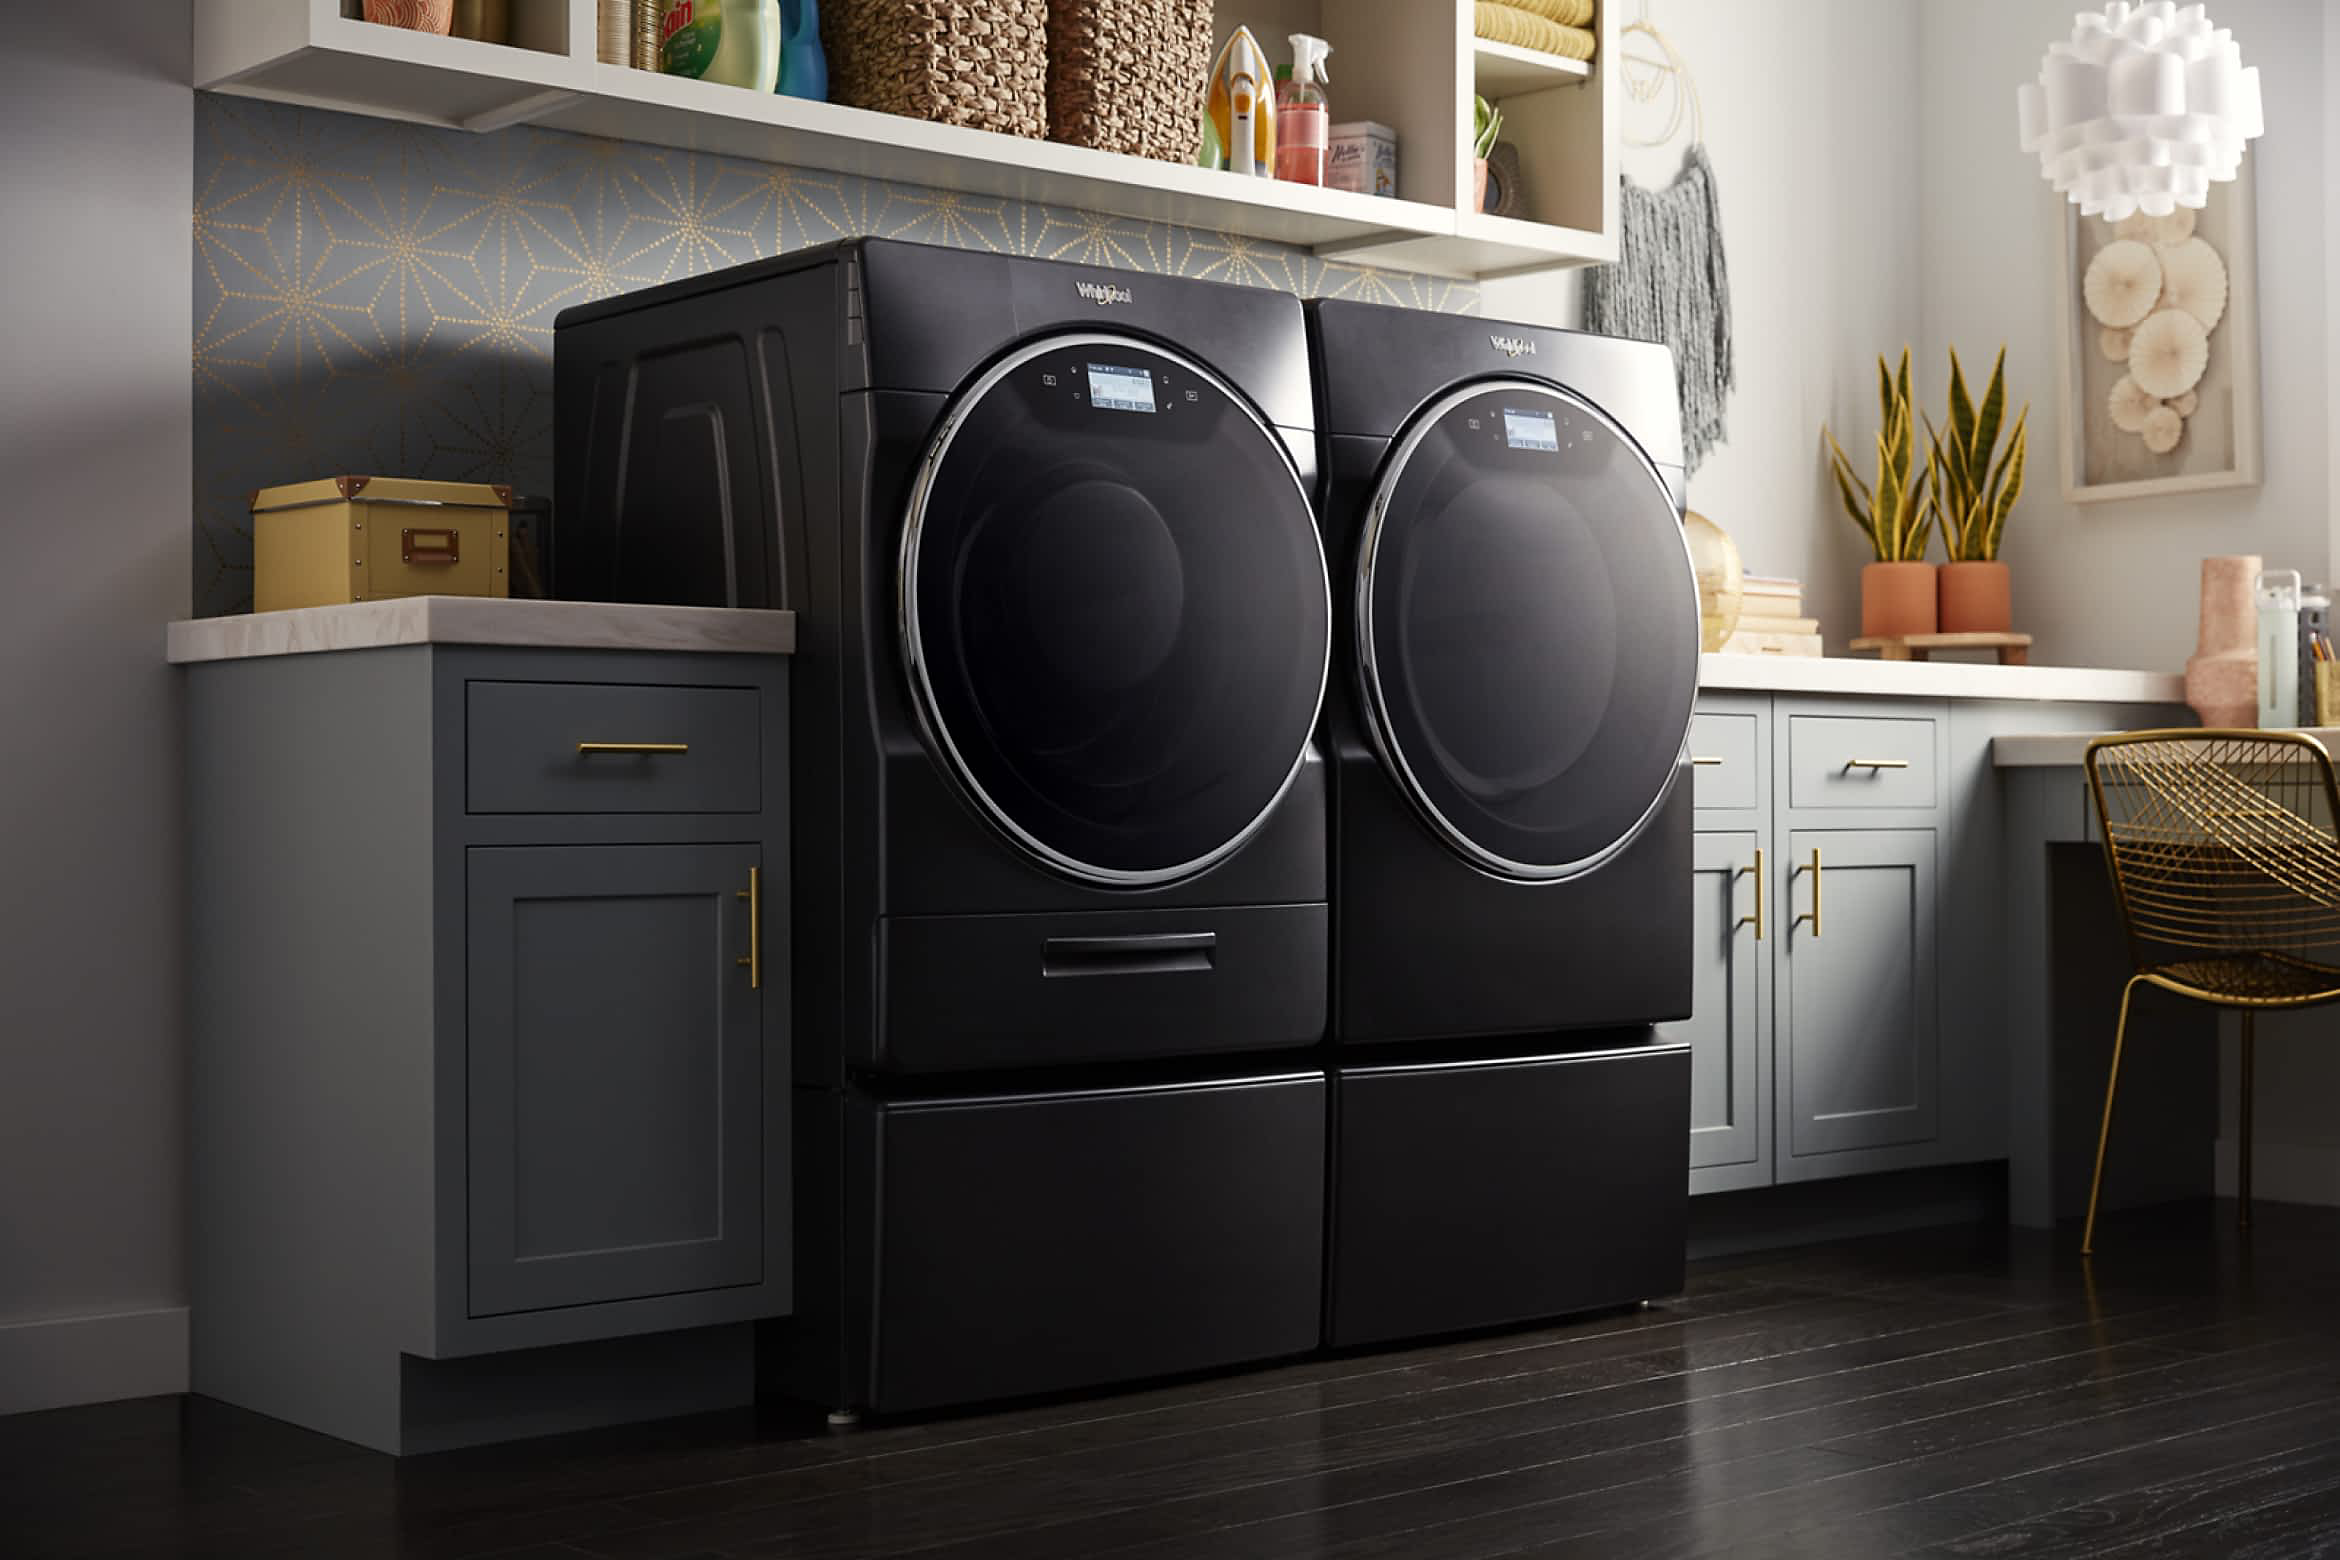 A Whirlpool® Front Load Washer & Dryer Set